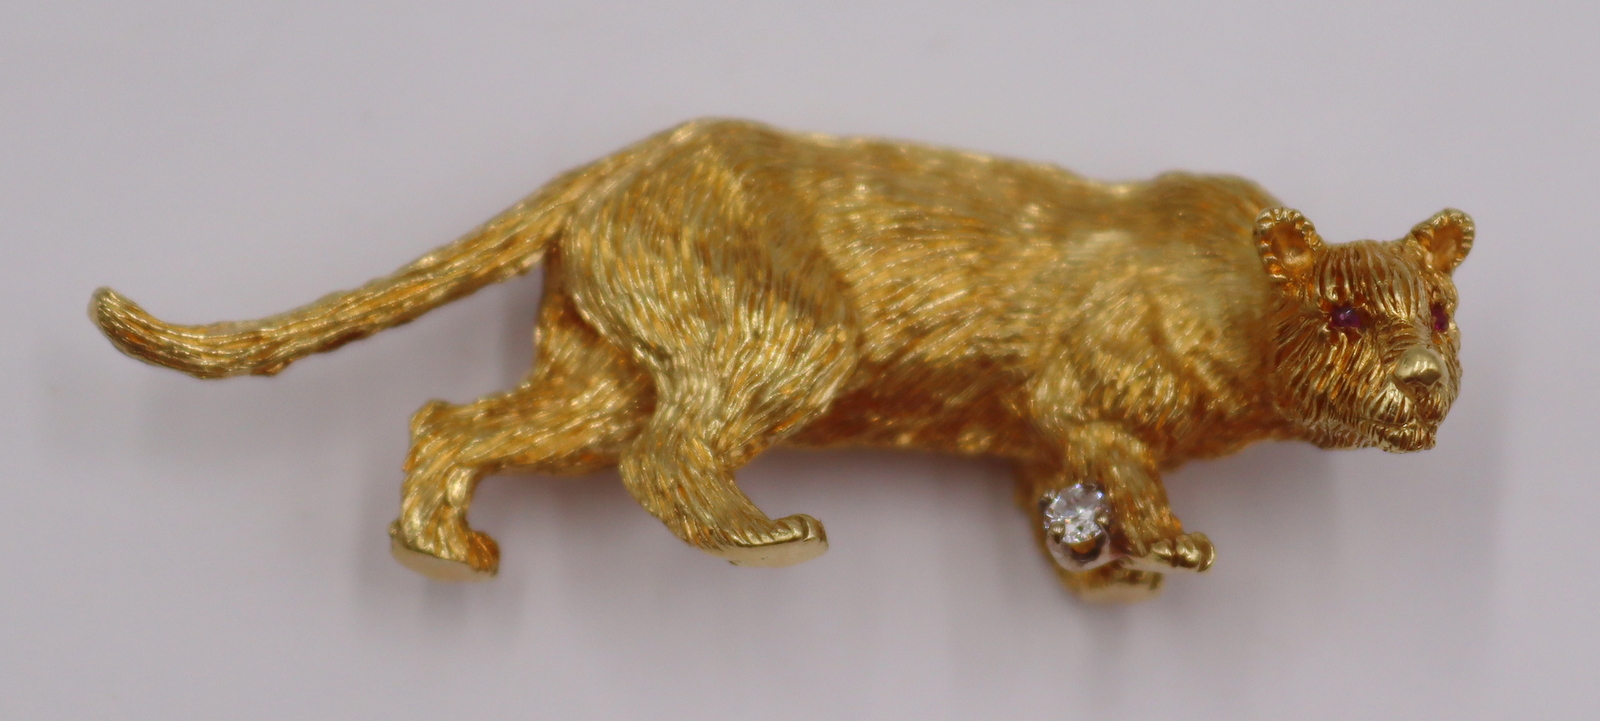 JEWELRY. 18KT GOLD PANTHER FORM